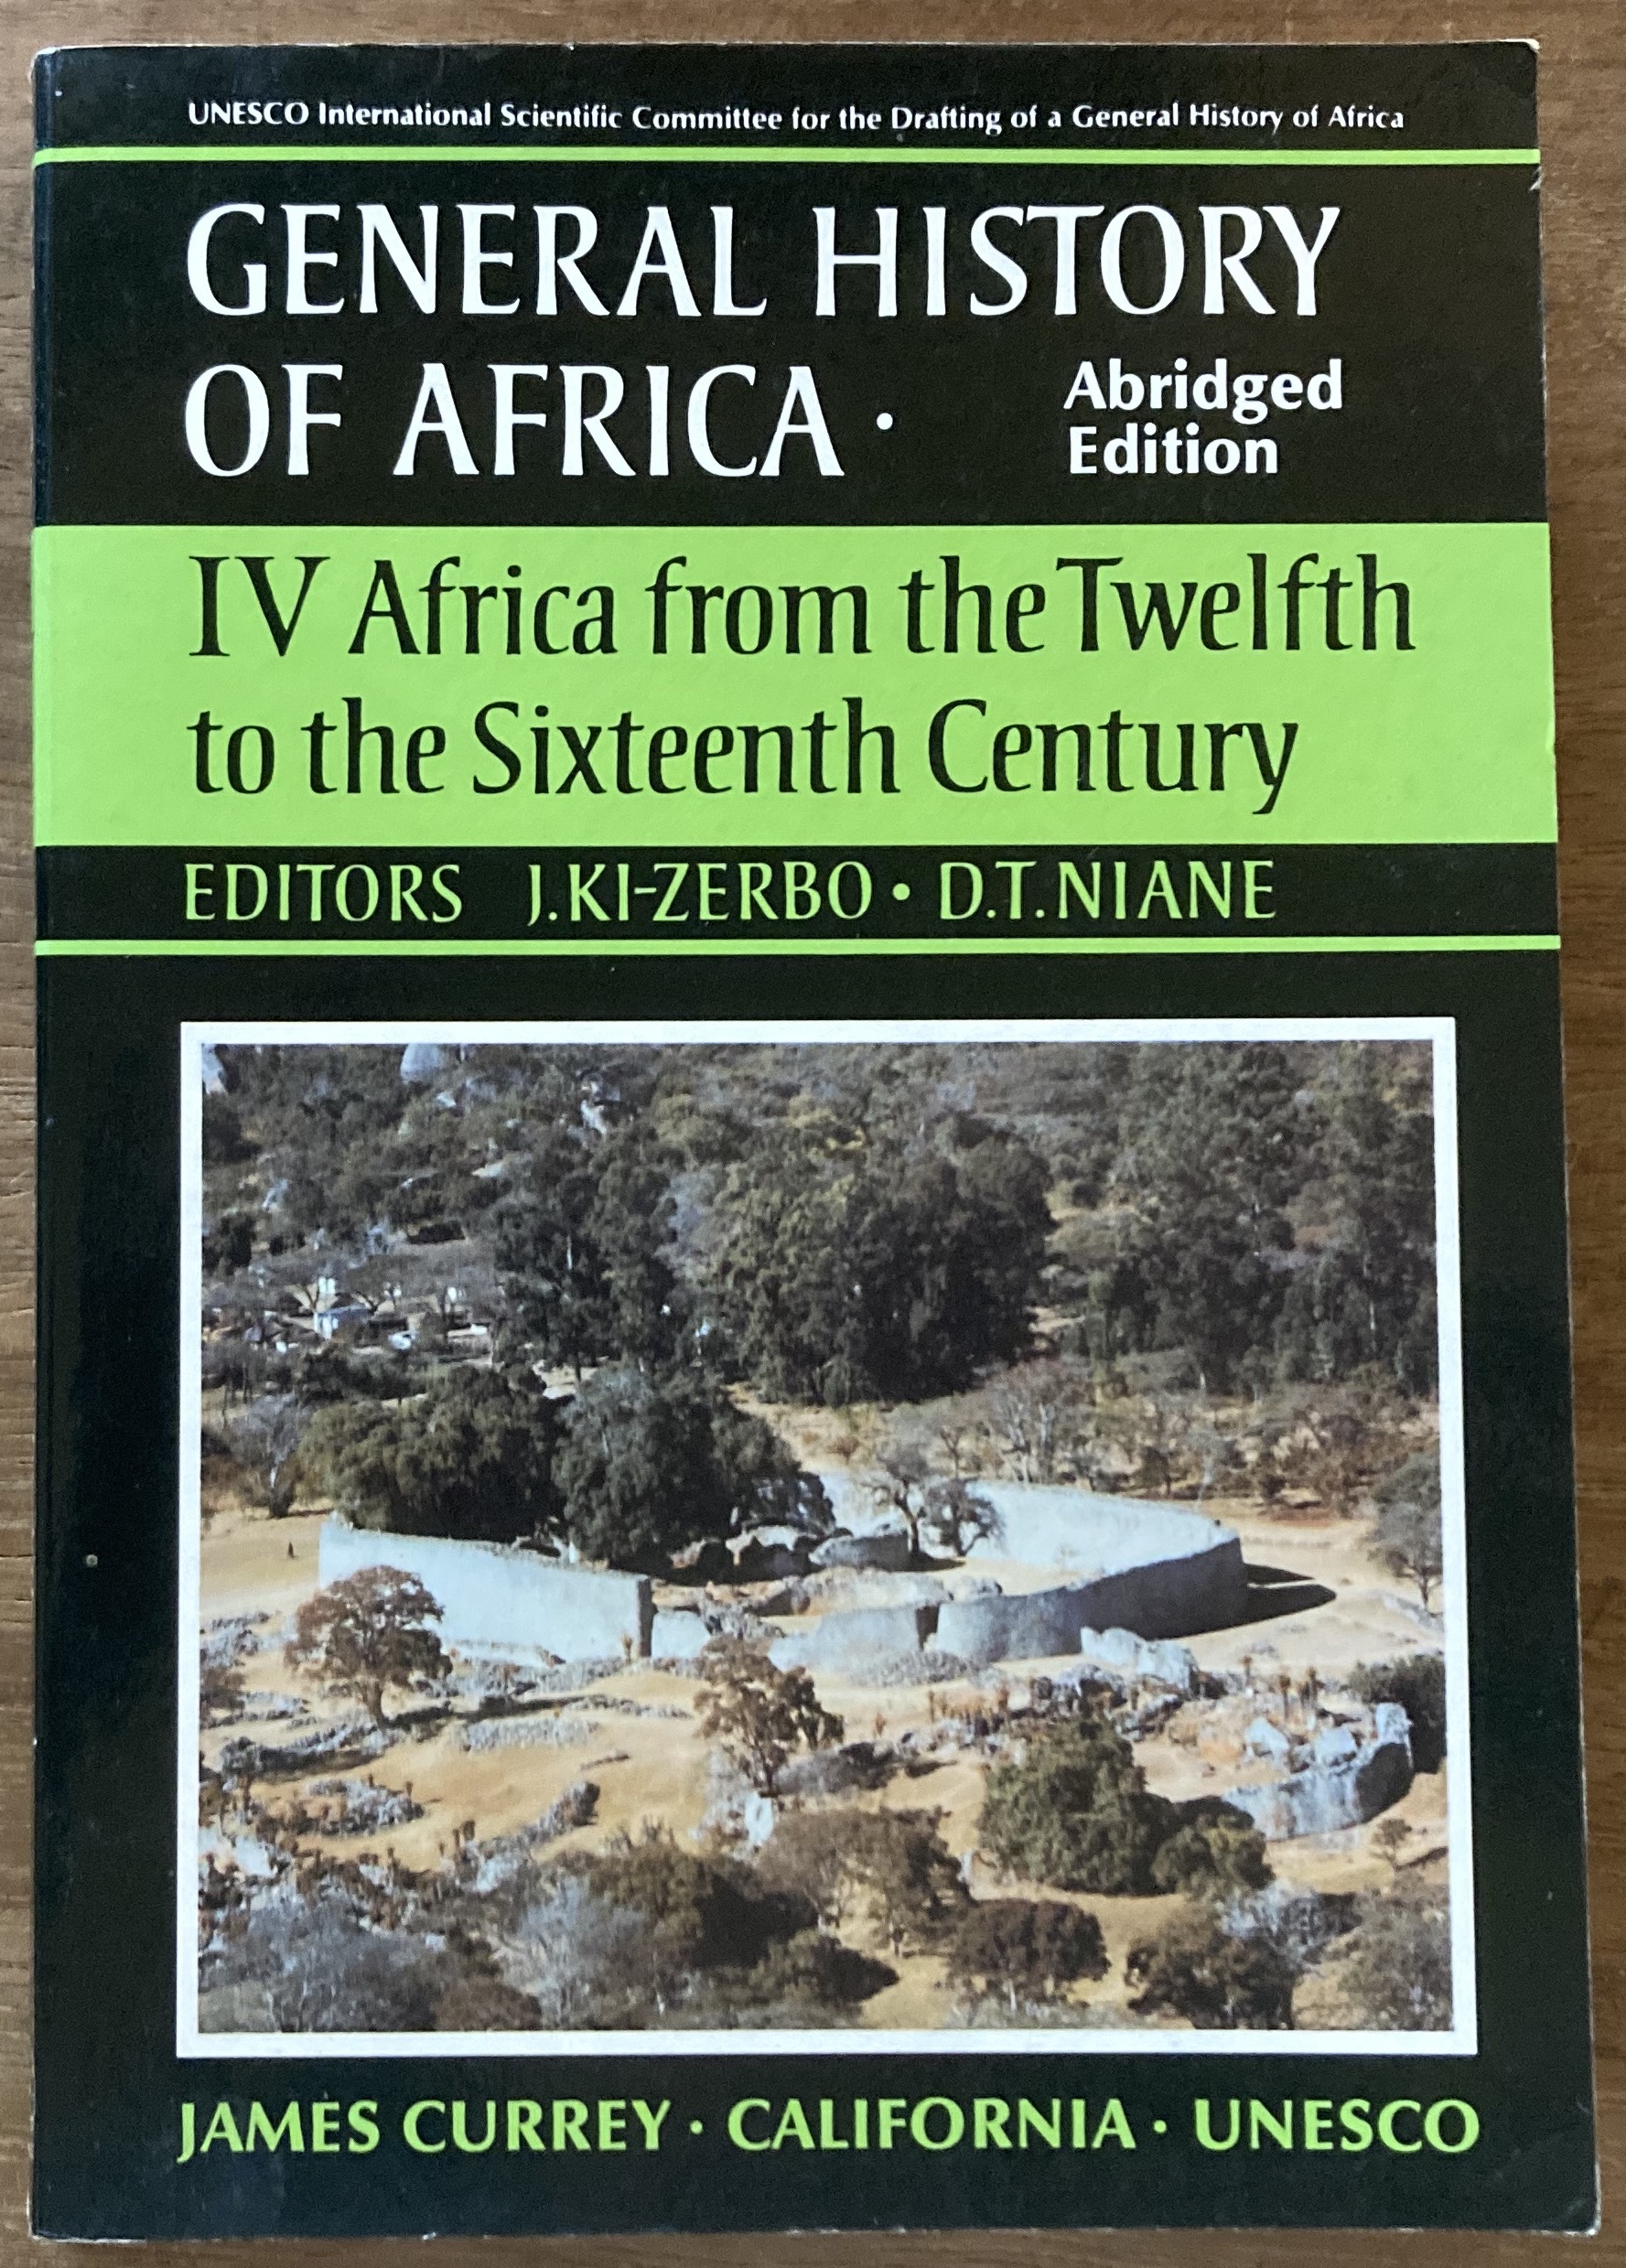 UNESCO General History of Africa, Vol. IV, Abridged Edition: Africa from the Twelfth to the Sixteenth Century (Volume 4) - Joseph Ki-Zerbo and Djibril Tamsir Niane, eds.